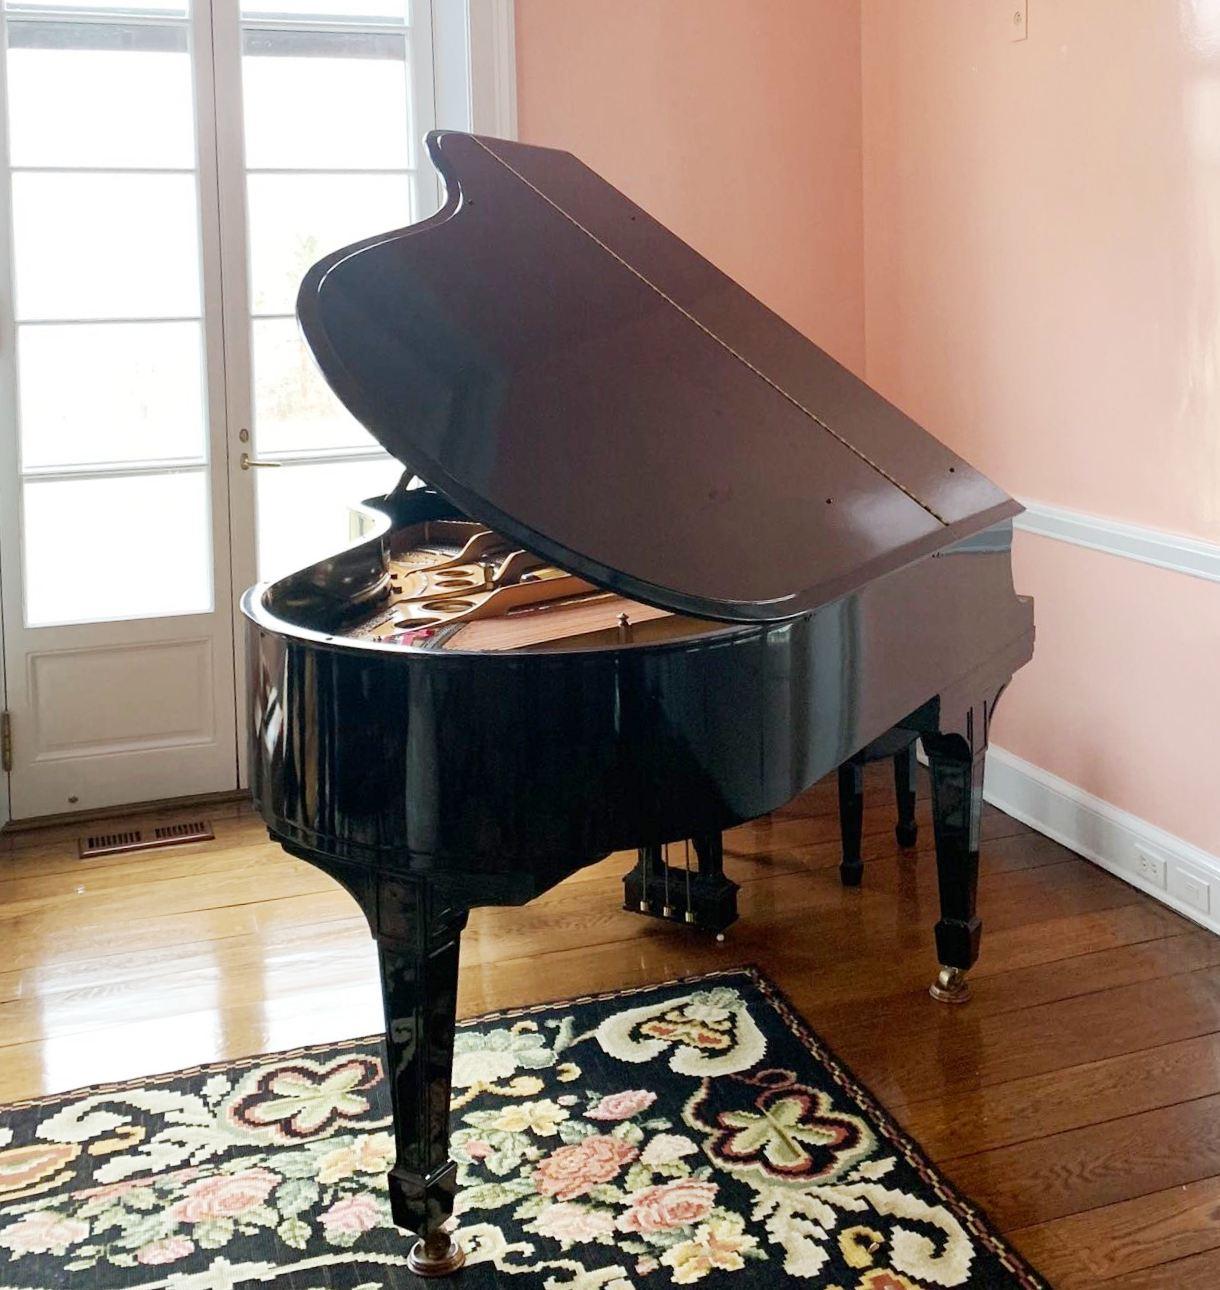 Art Deco period baby grand piano with matching leather tufted stool, made by Steinway & Sons in New York City. The piece has a black lacquered hardwood case and was made in circa 1920.
Model O, serial no. 204177.
In great vintage condition with